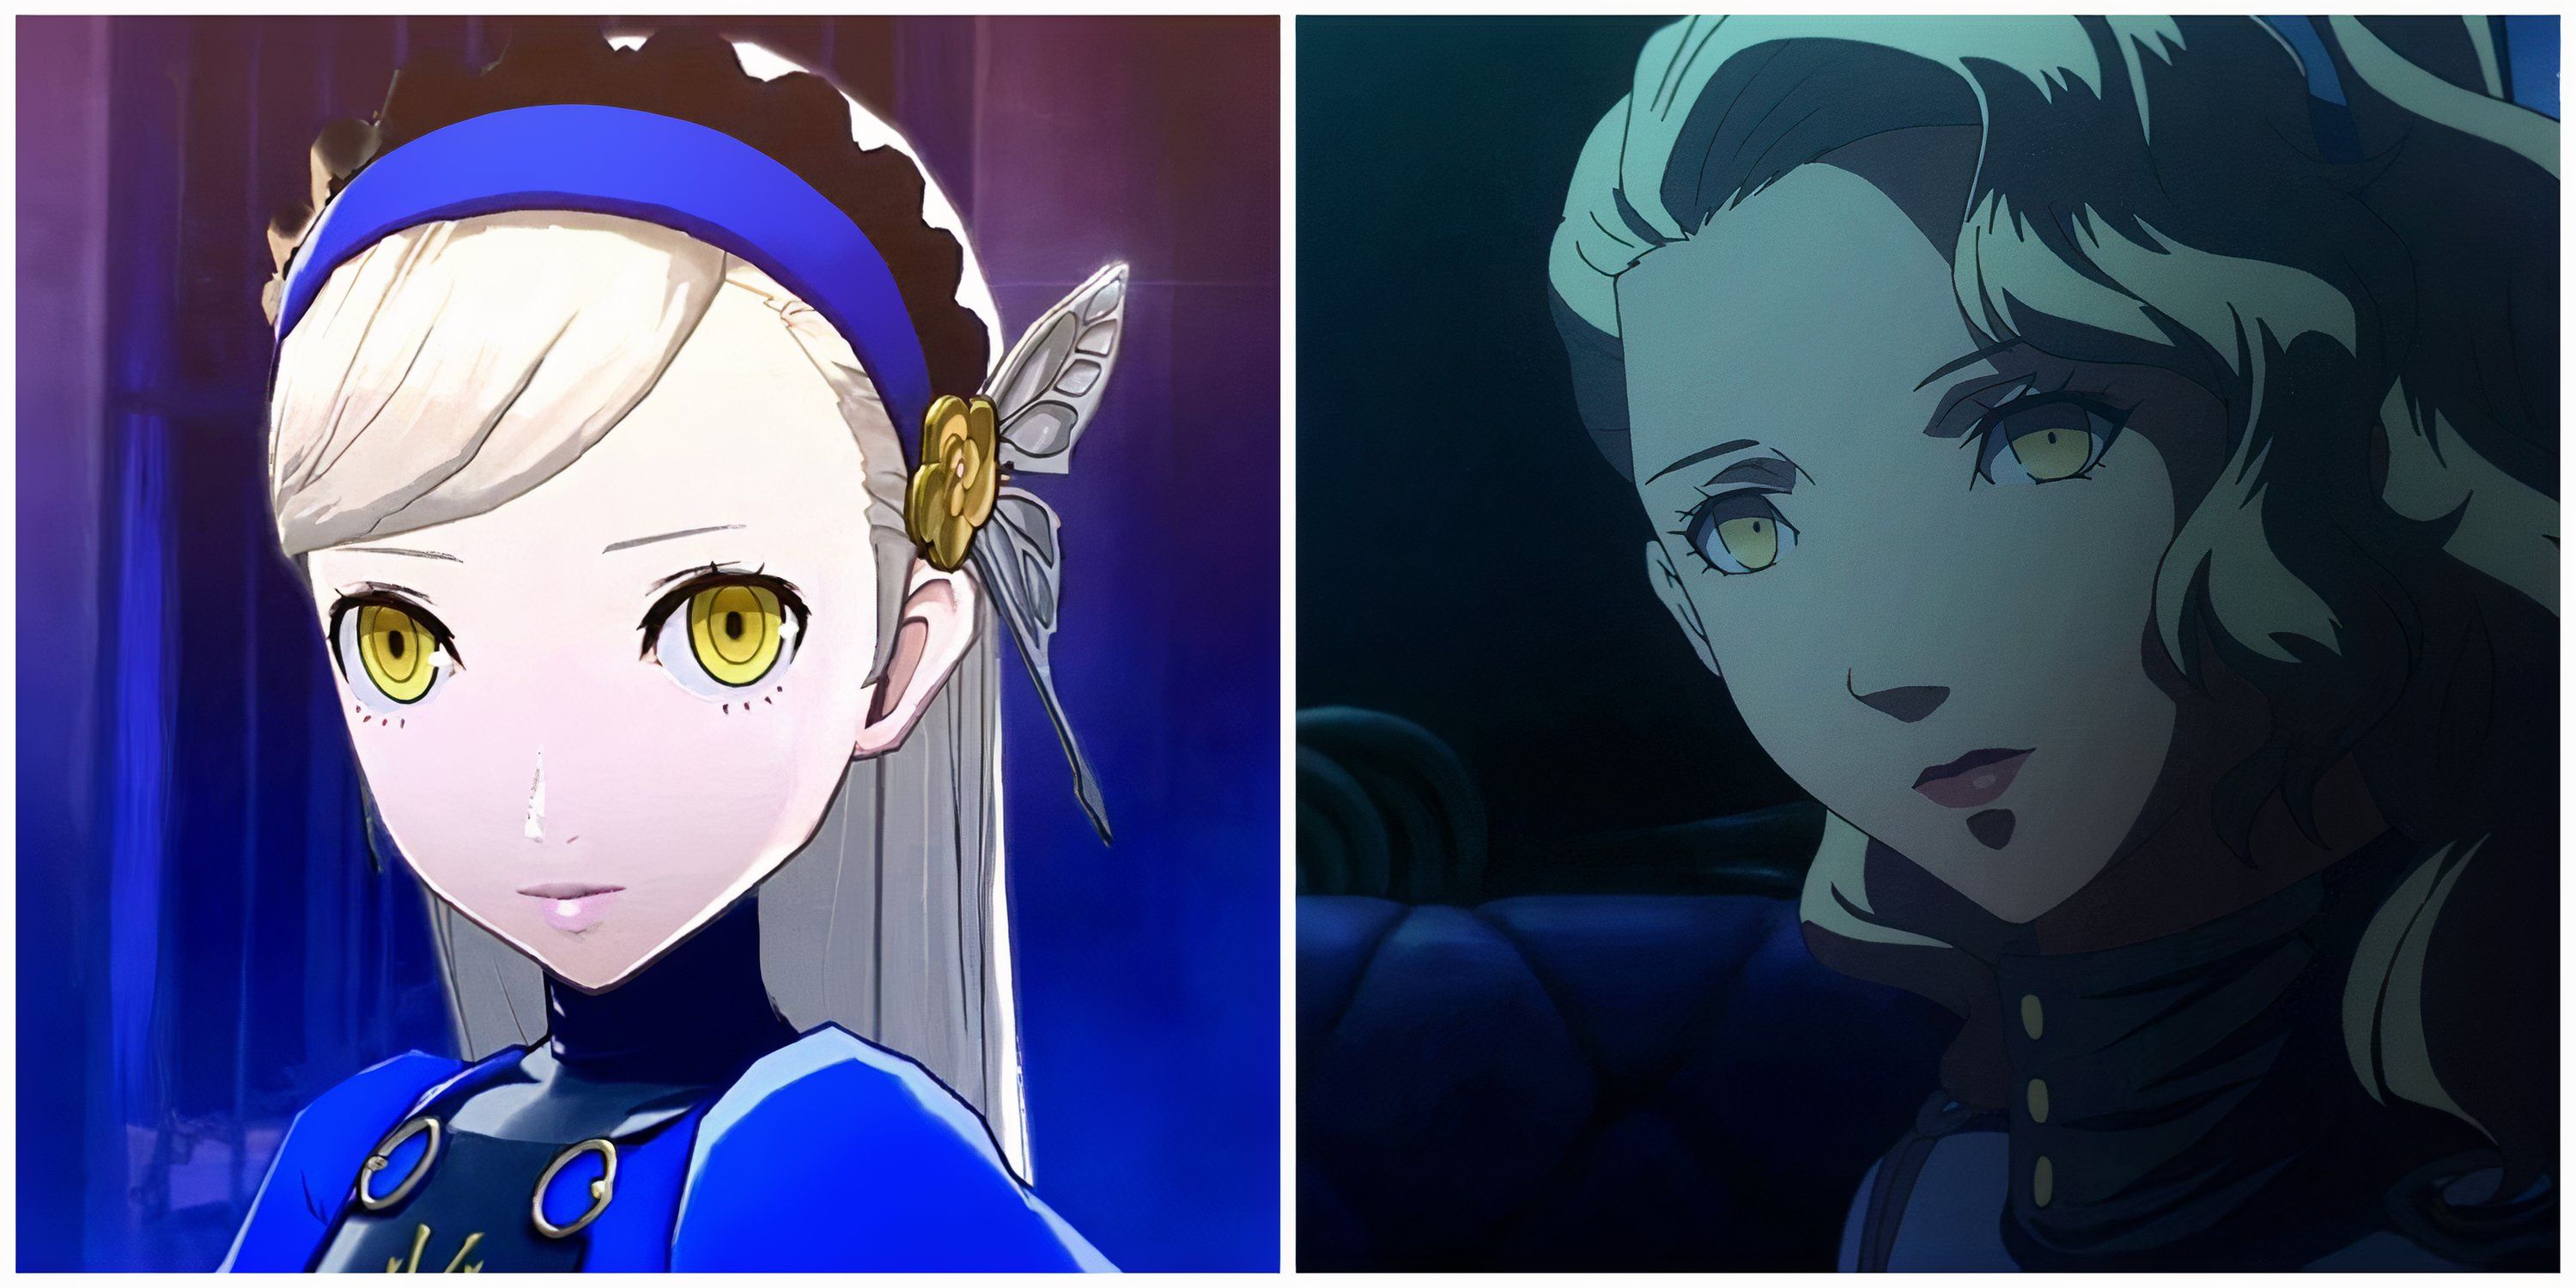 A Split Image of the Hardest Bosses in Persona Games, Ranked